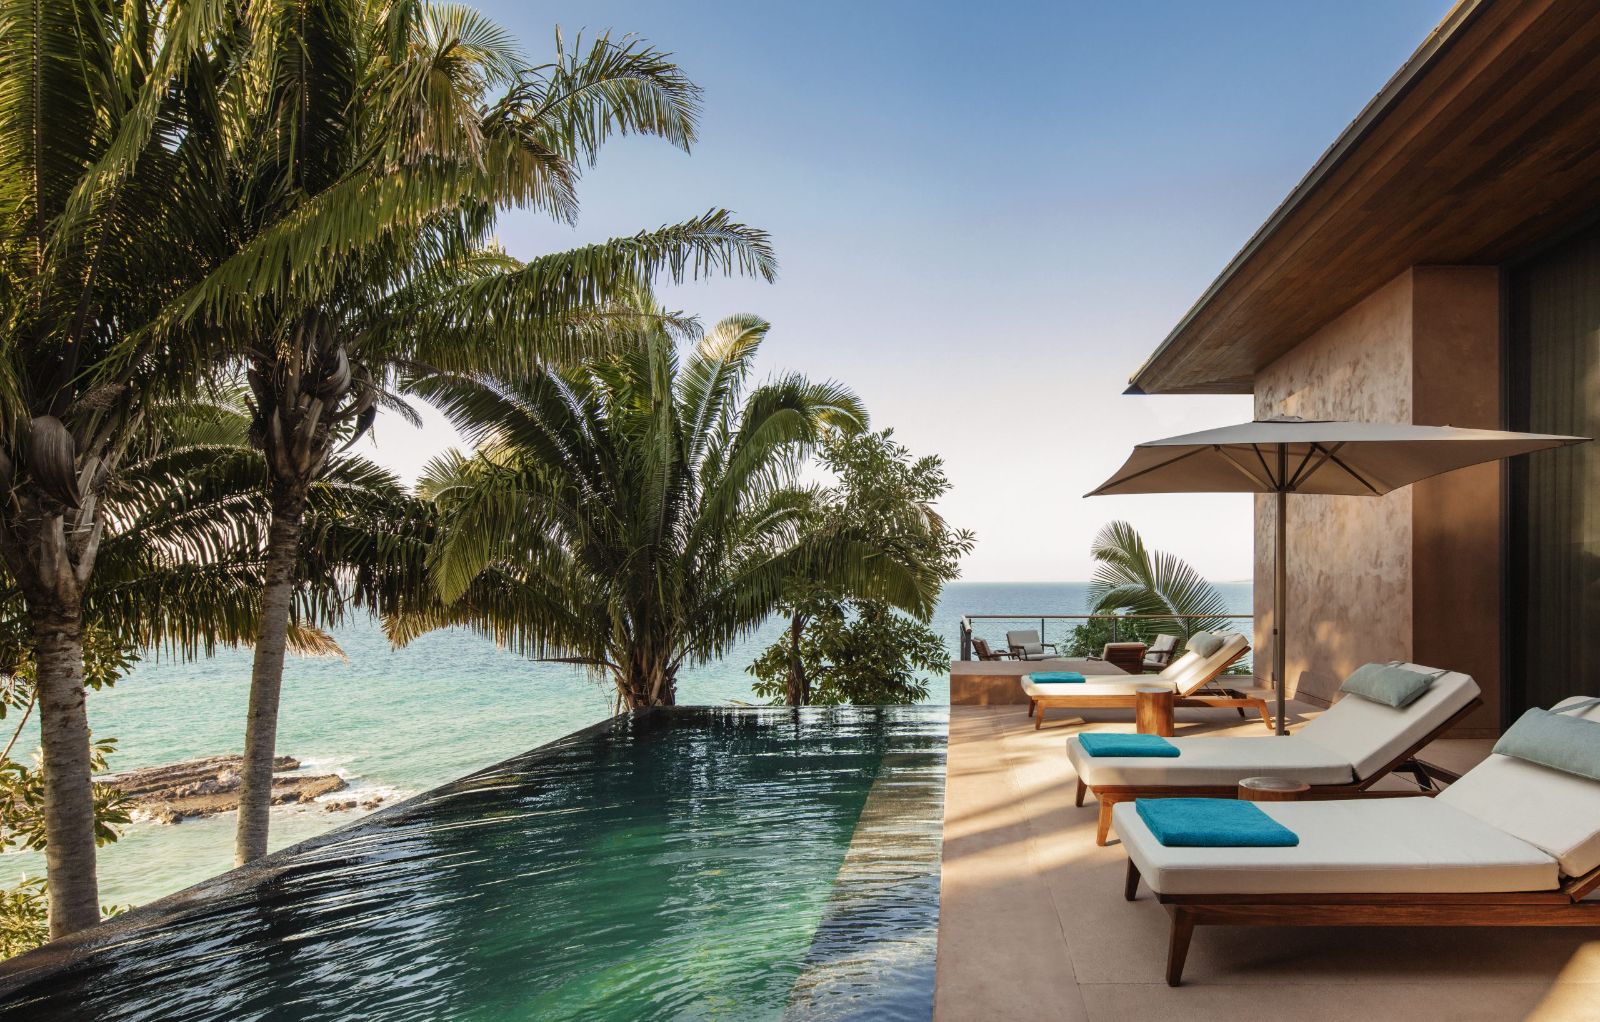 Villa loungers by the pool at One&Only <amdarina on Mexico's Riviera Nayarit